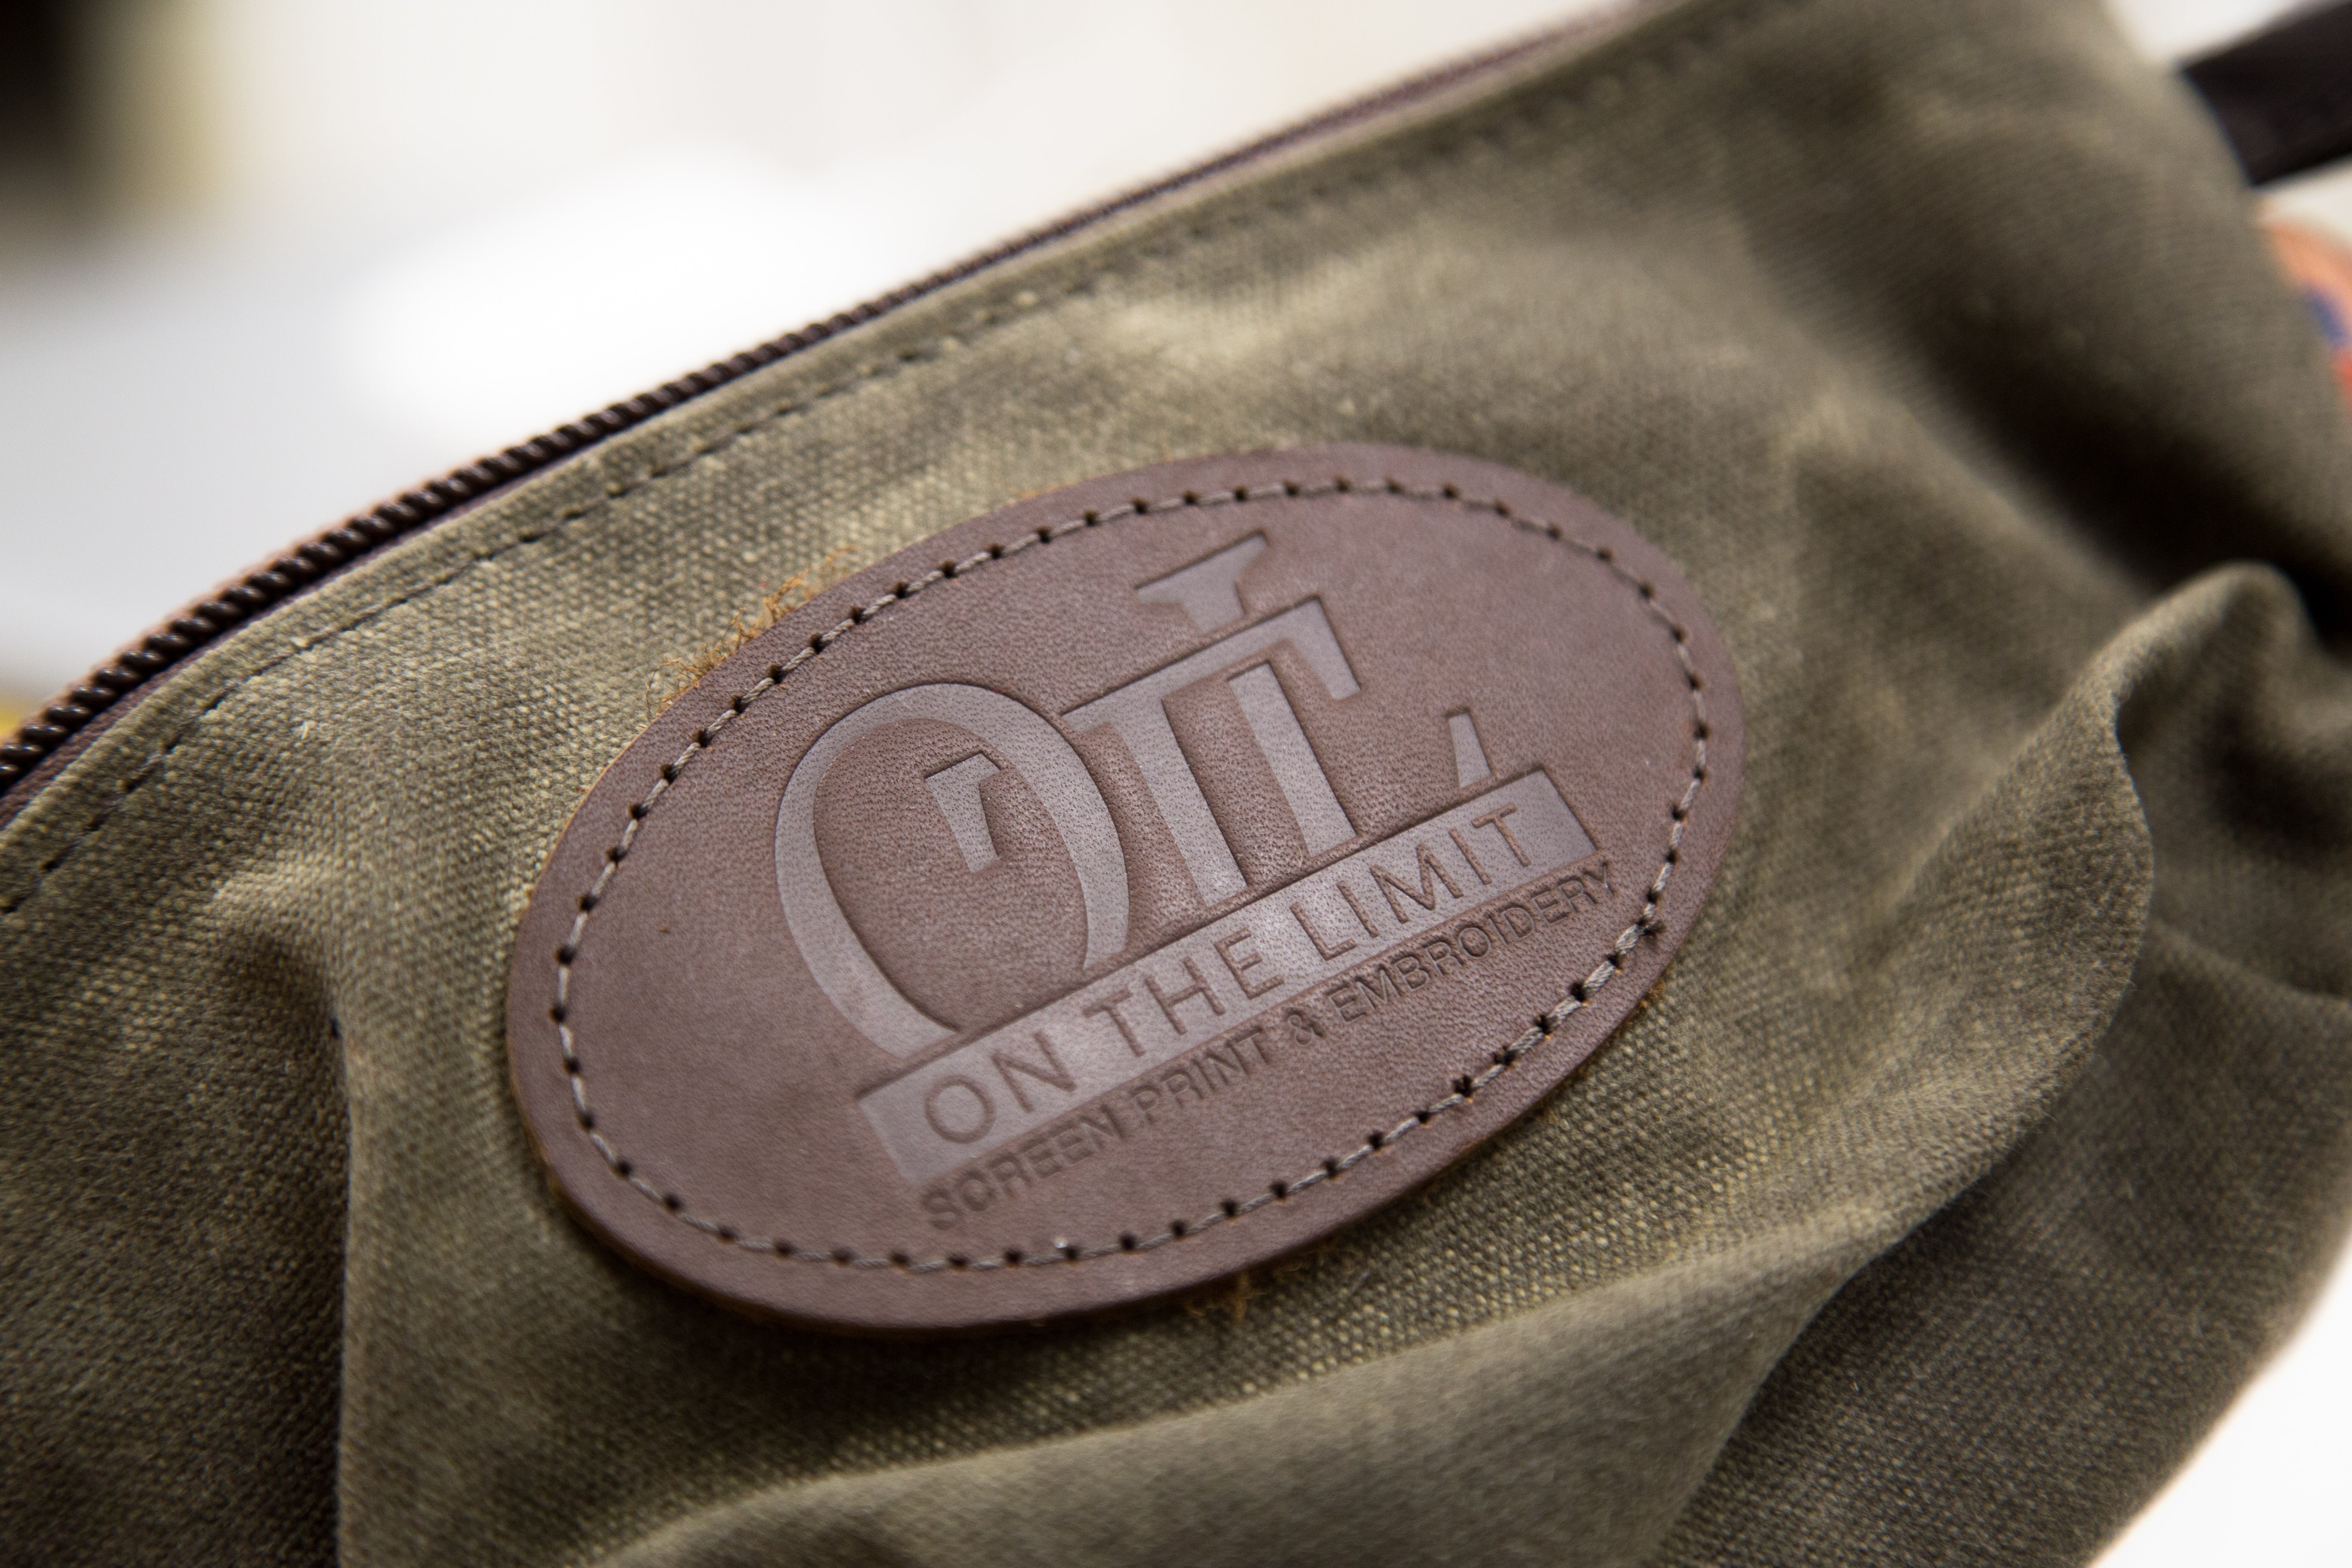 On The Limit branded leather patch on a Frost River accessory bag.